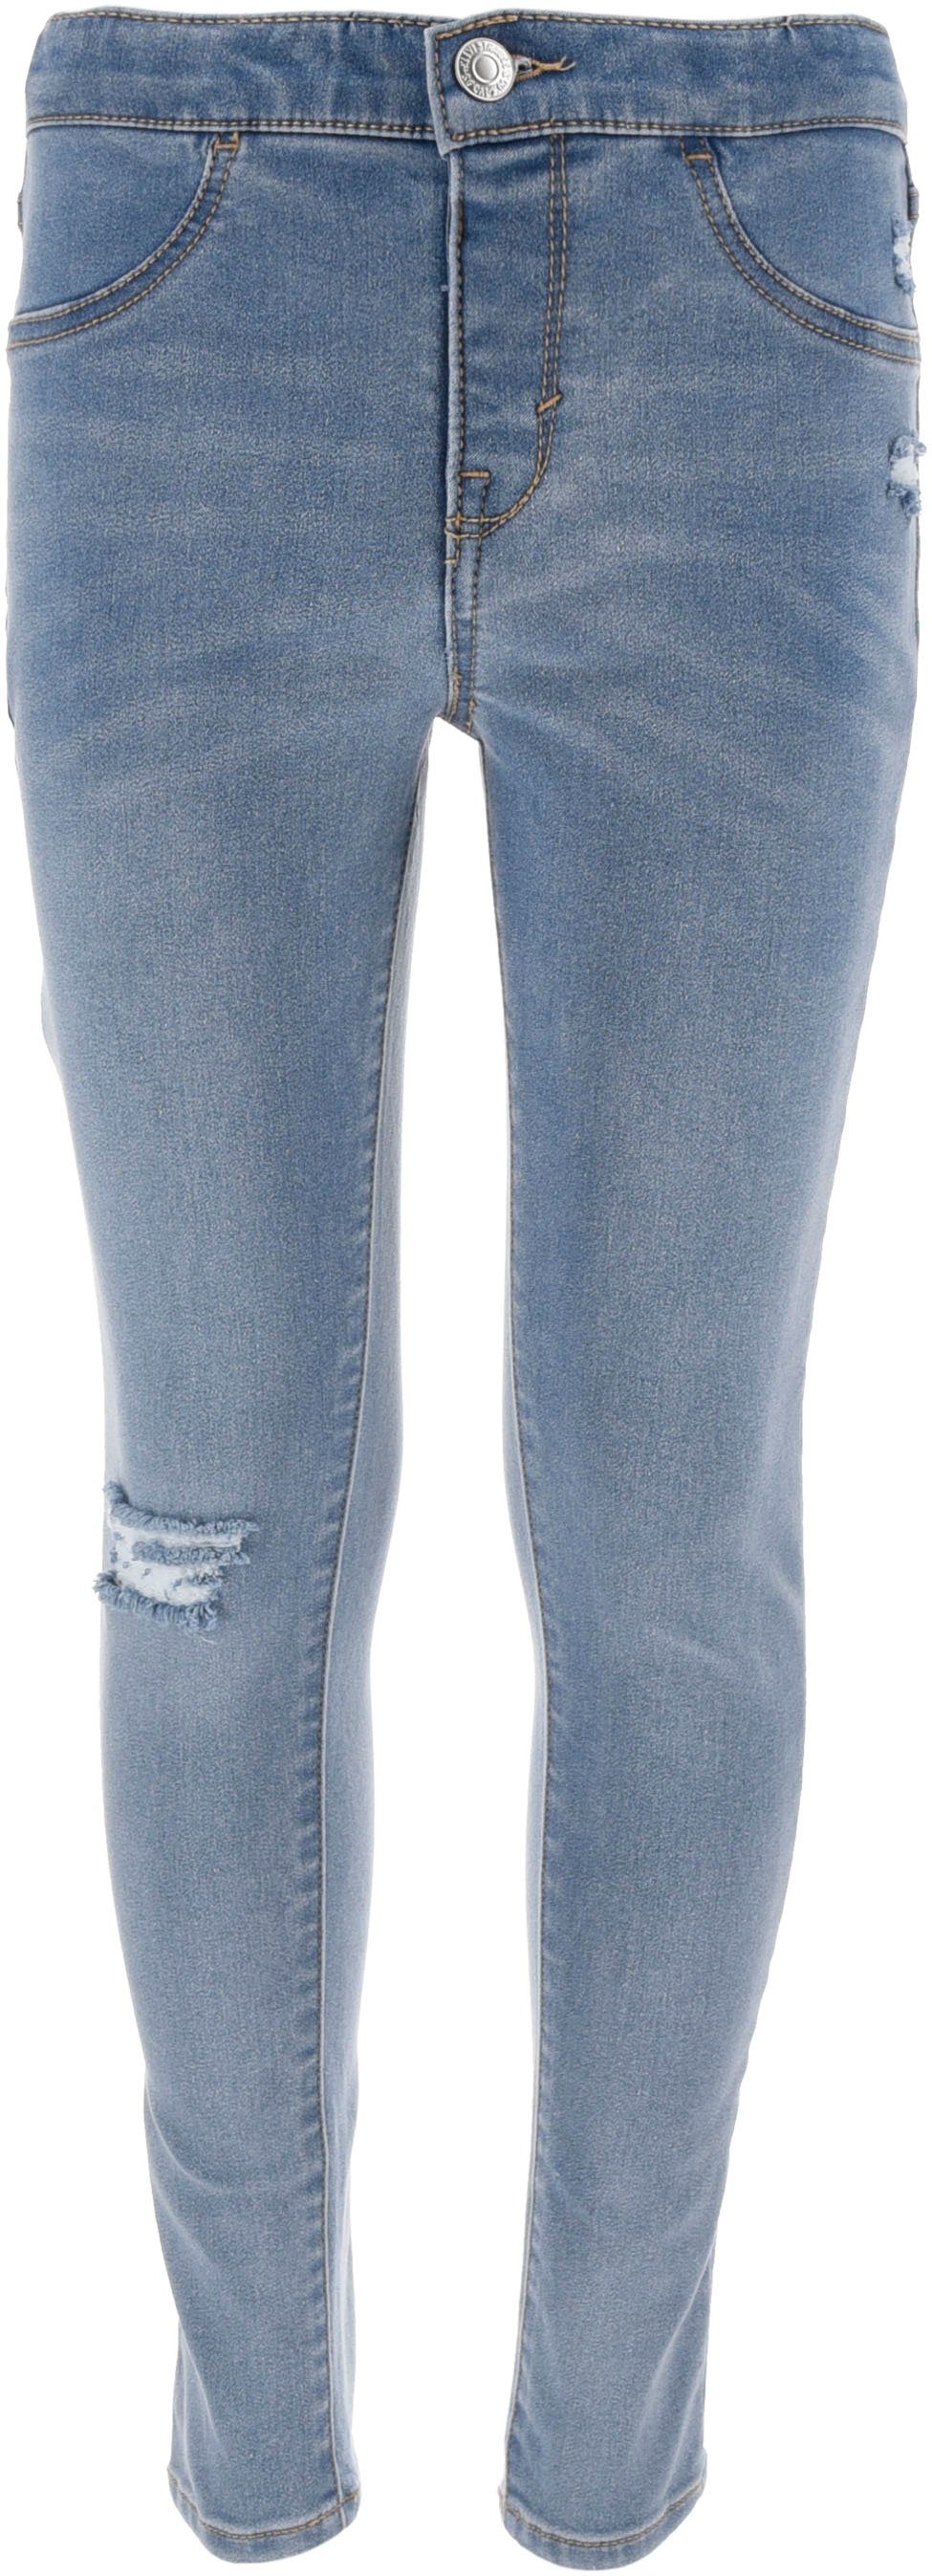 [Übersee-Standard] Levi's® Kids Jeansjeggings GIRLS miami for PULL-ON LEGGINGS vices